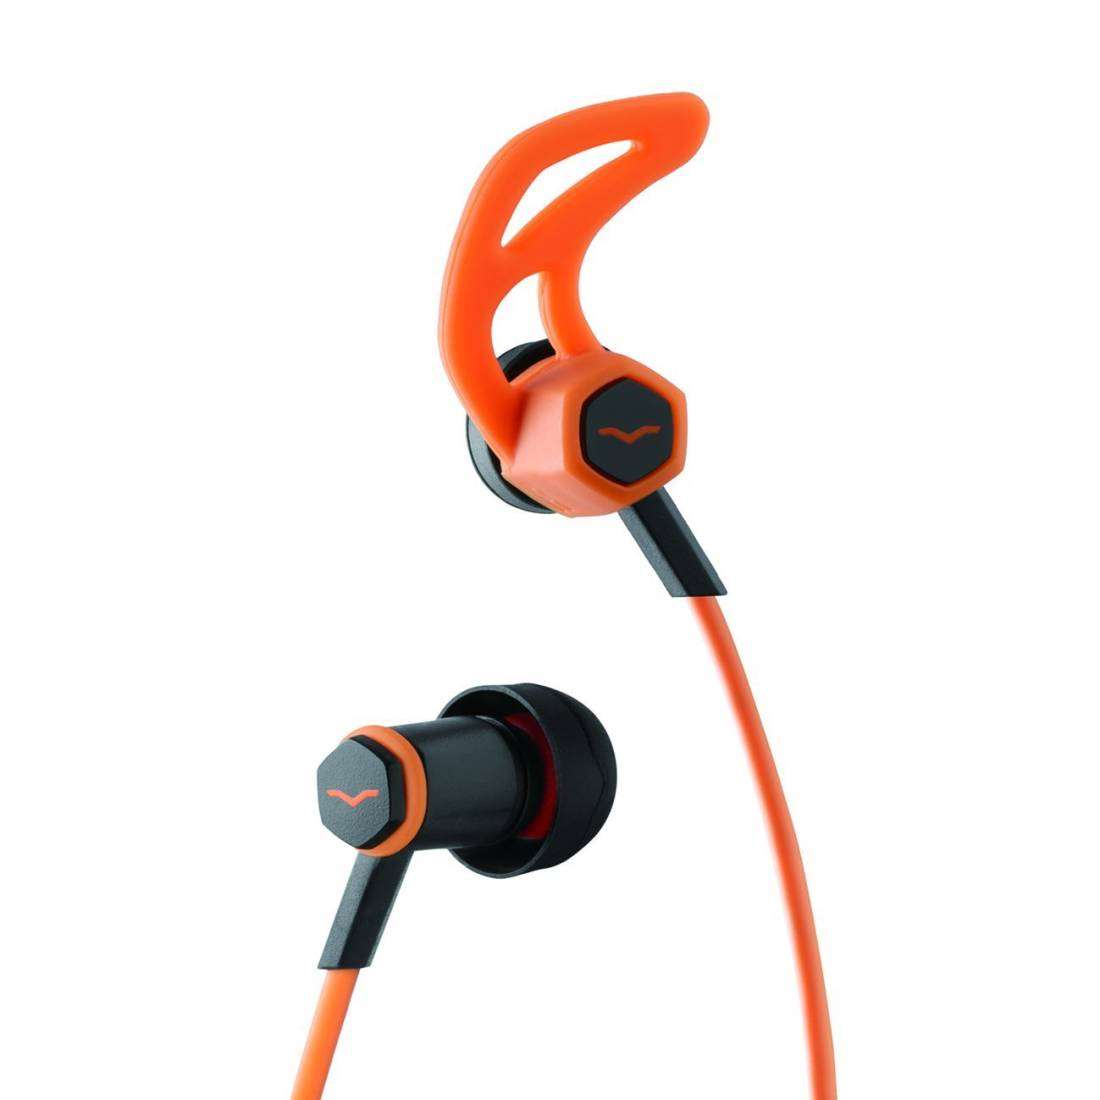 Forza In-Ear Android Headphones - Orange